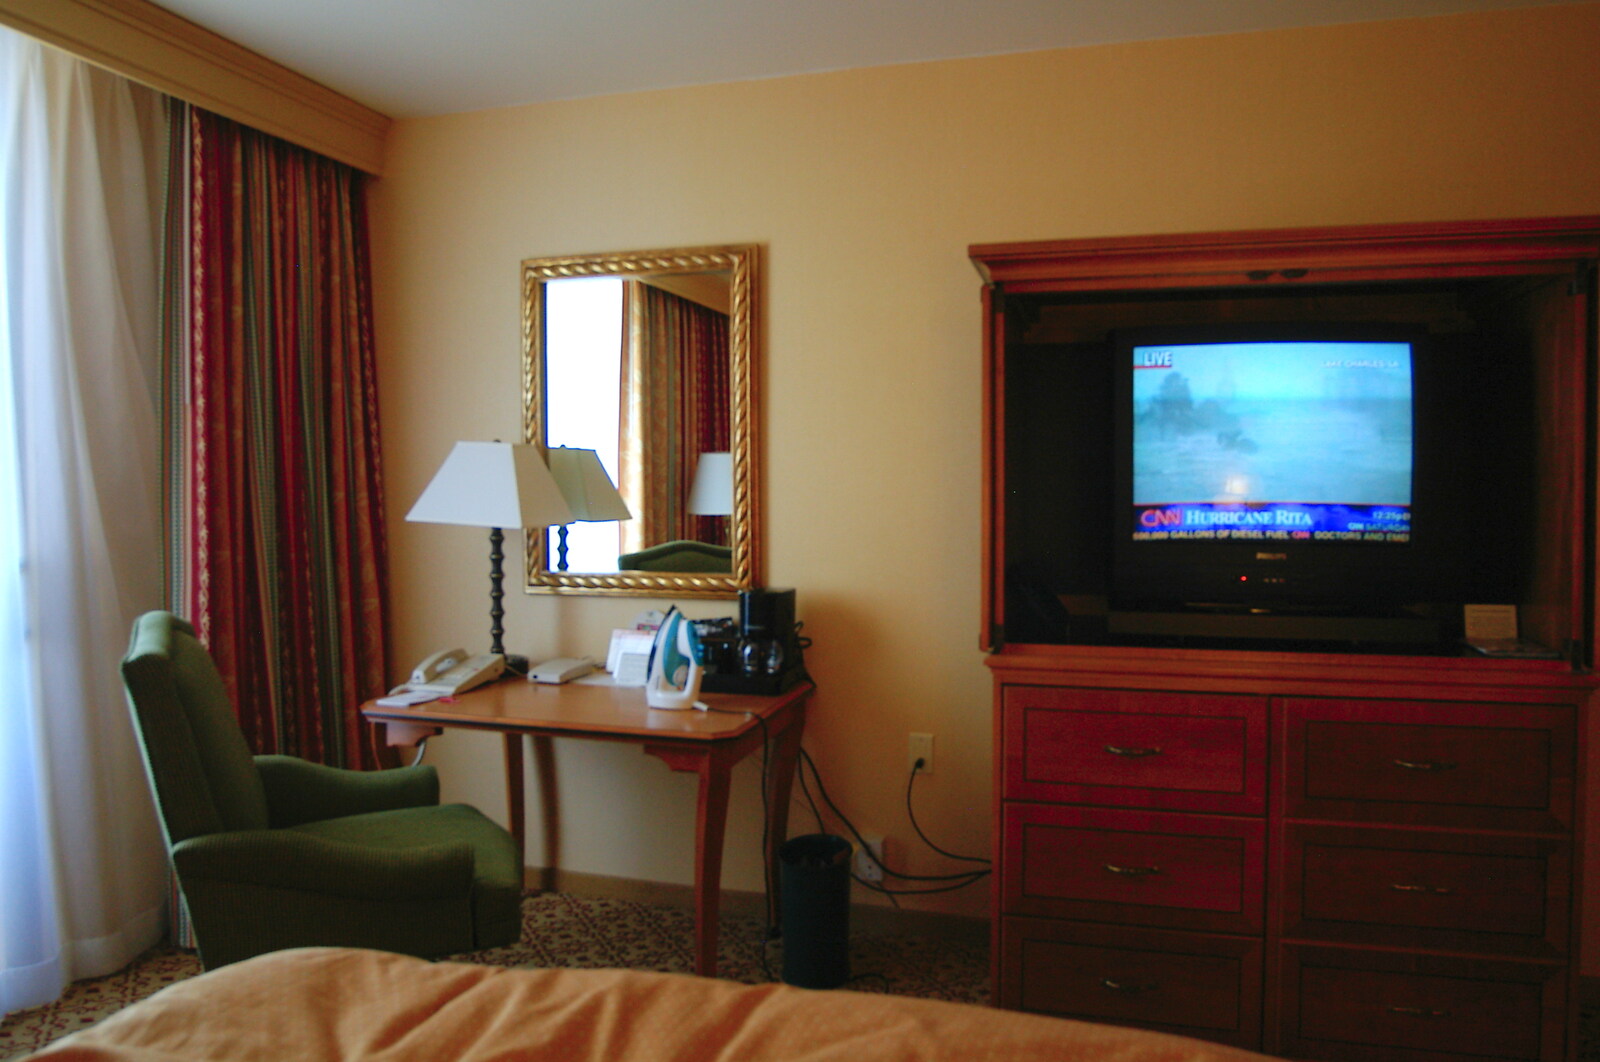 Nosher's room, with hurricane Rita on TV from San Diego Four, California, US - 22nd September 2005